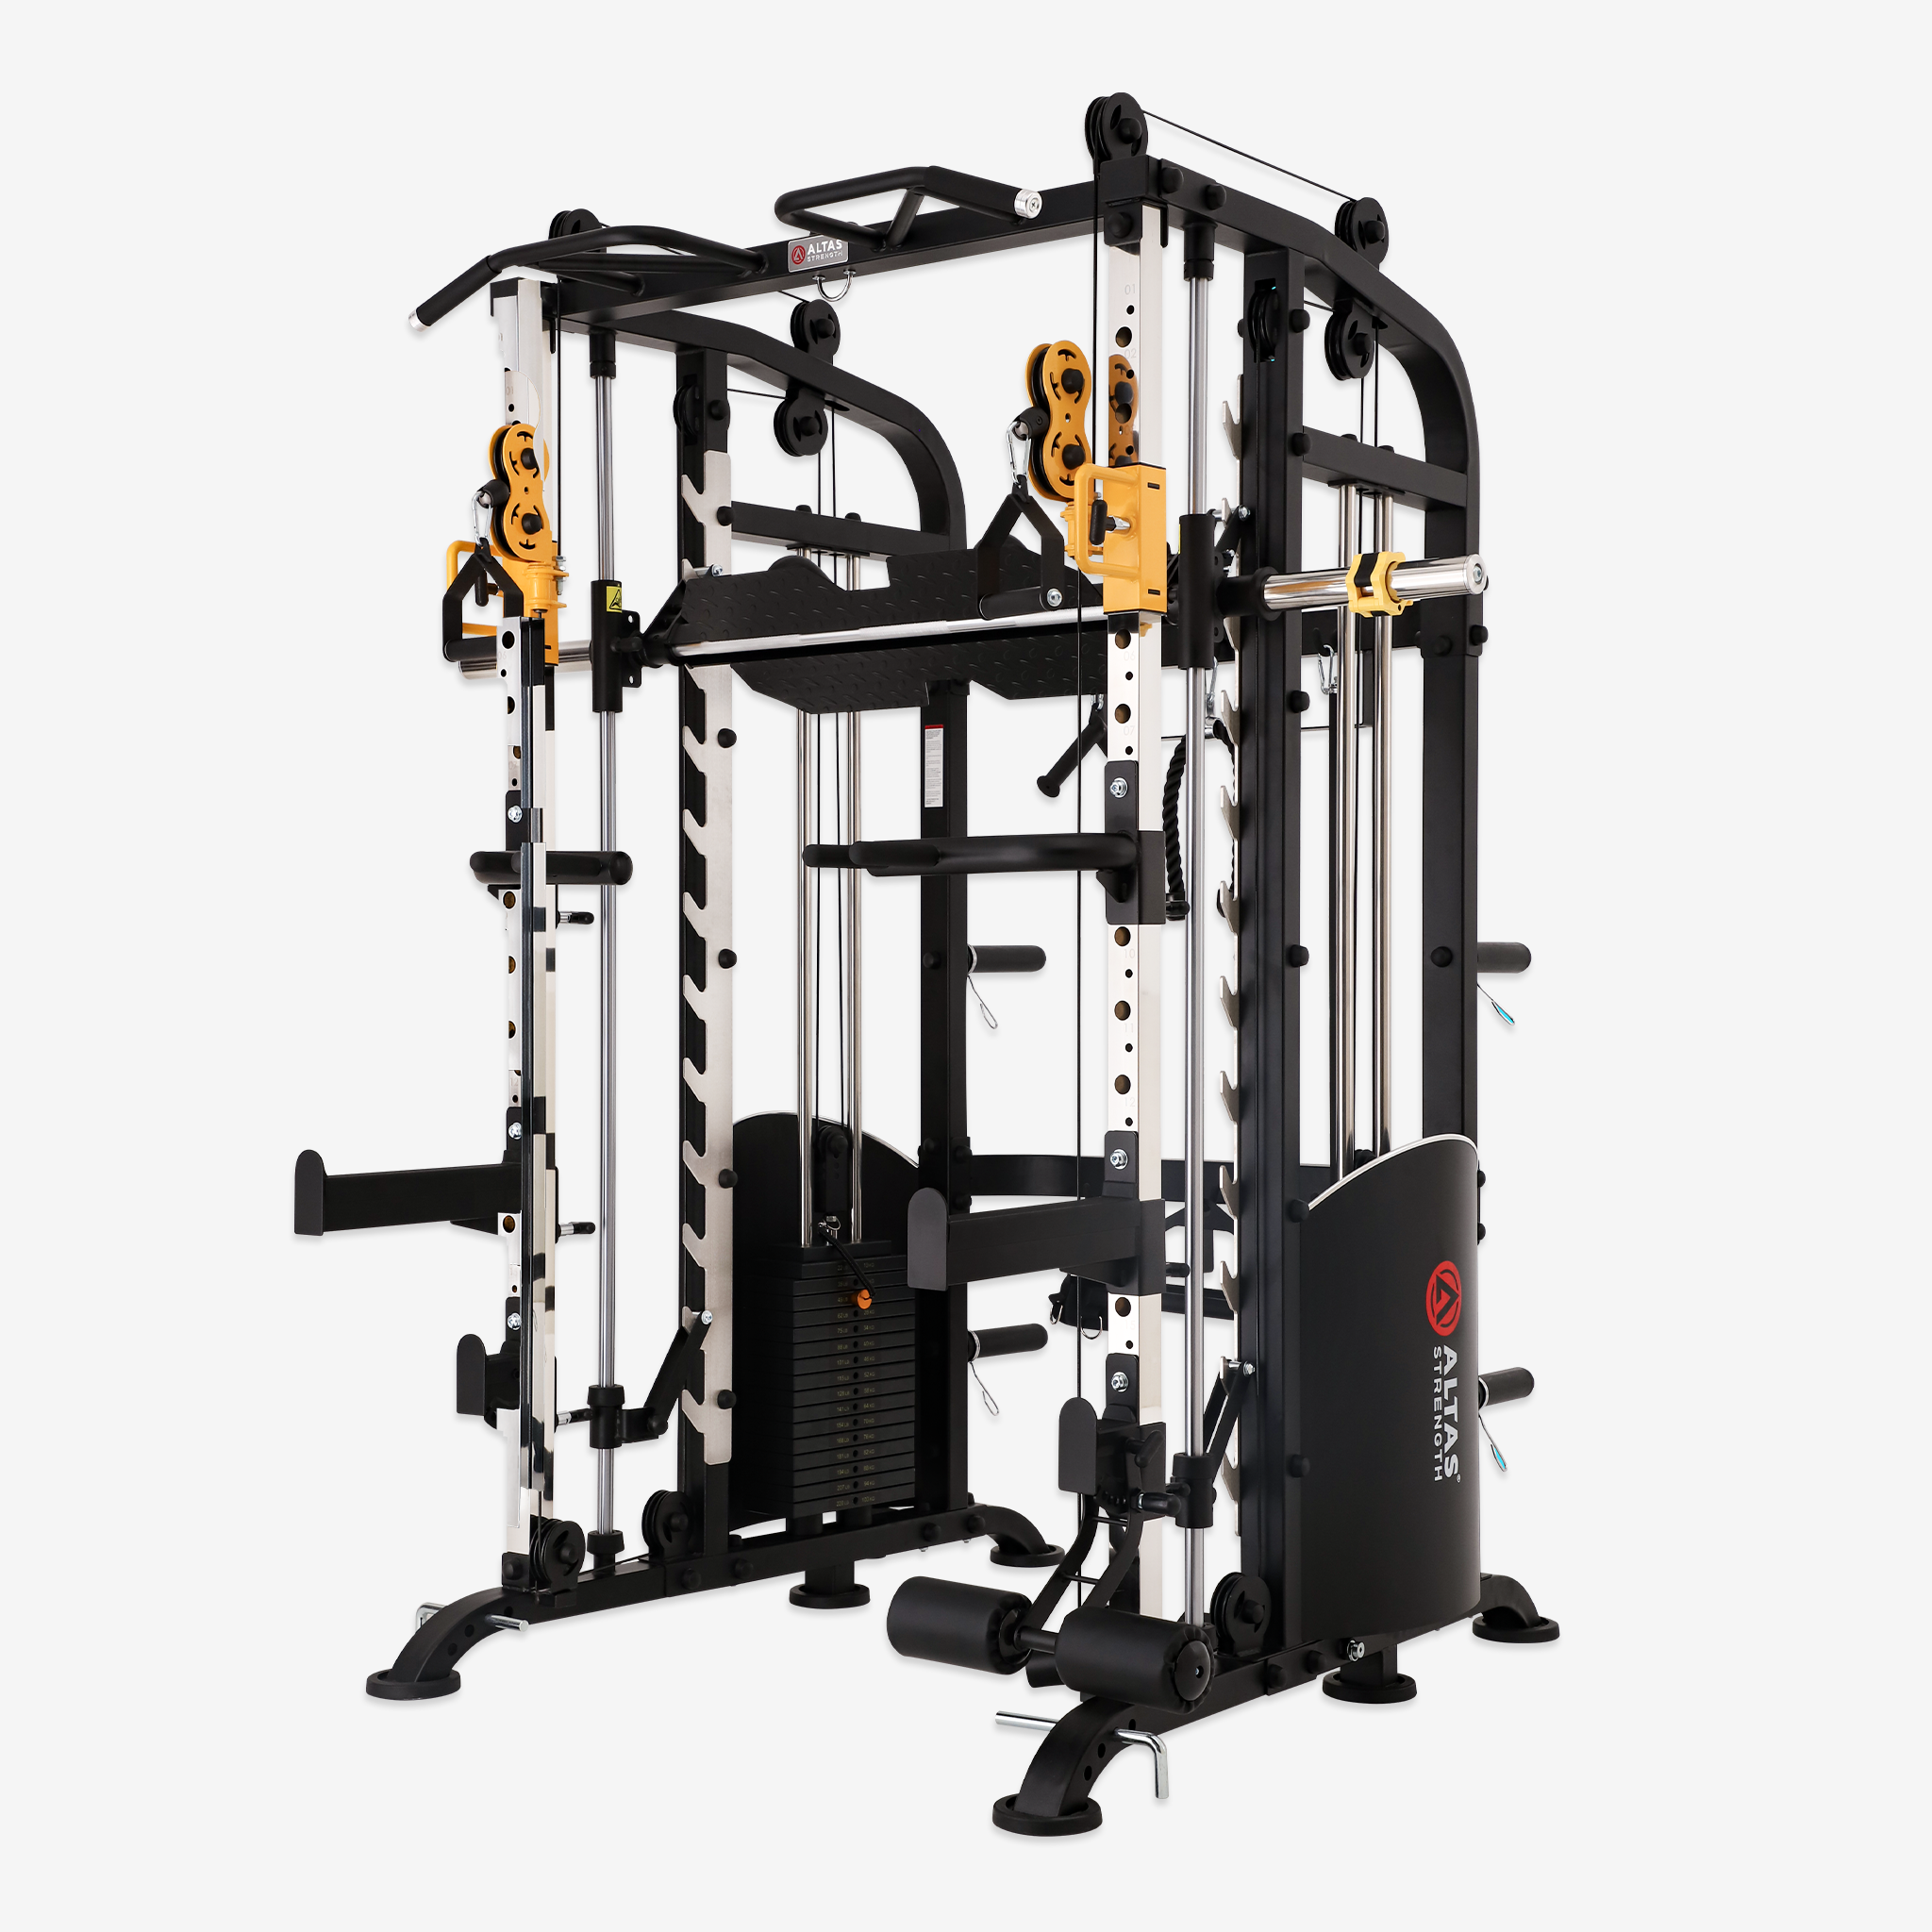 Functional Trainer One Month Use Review! An All in One Home Gym